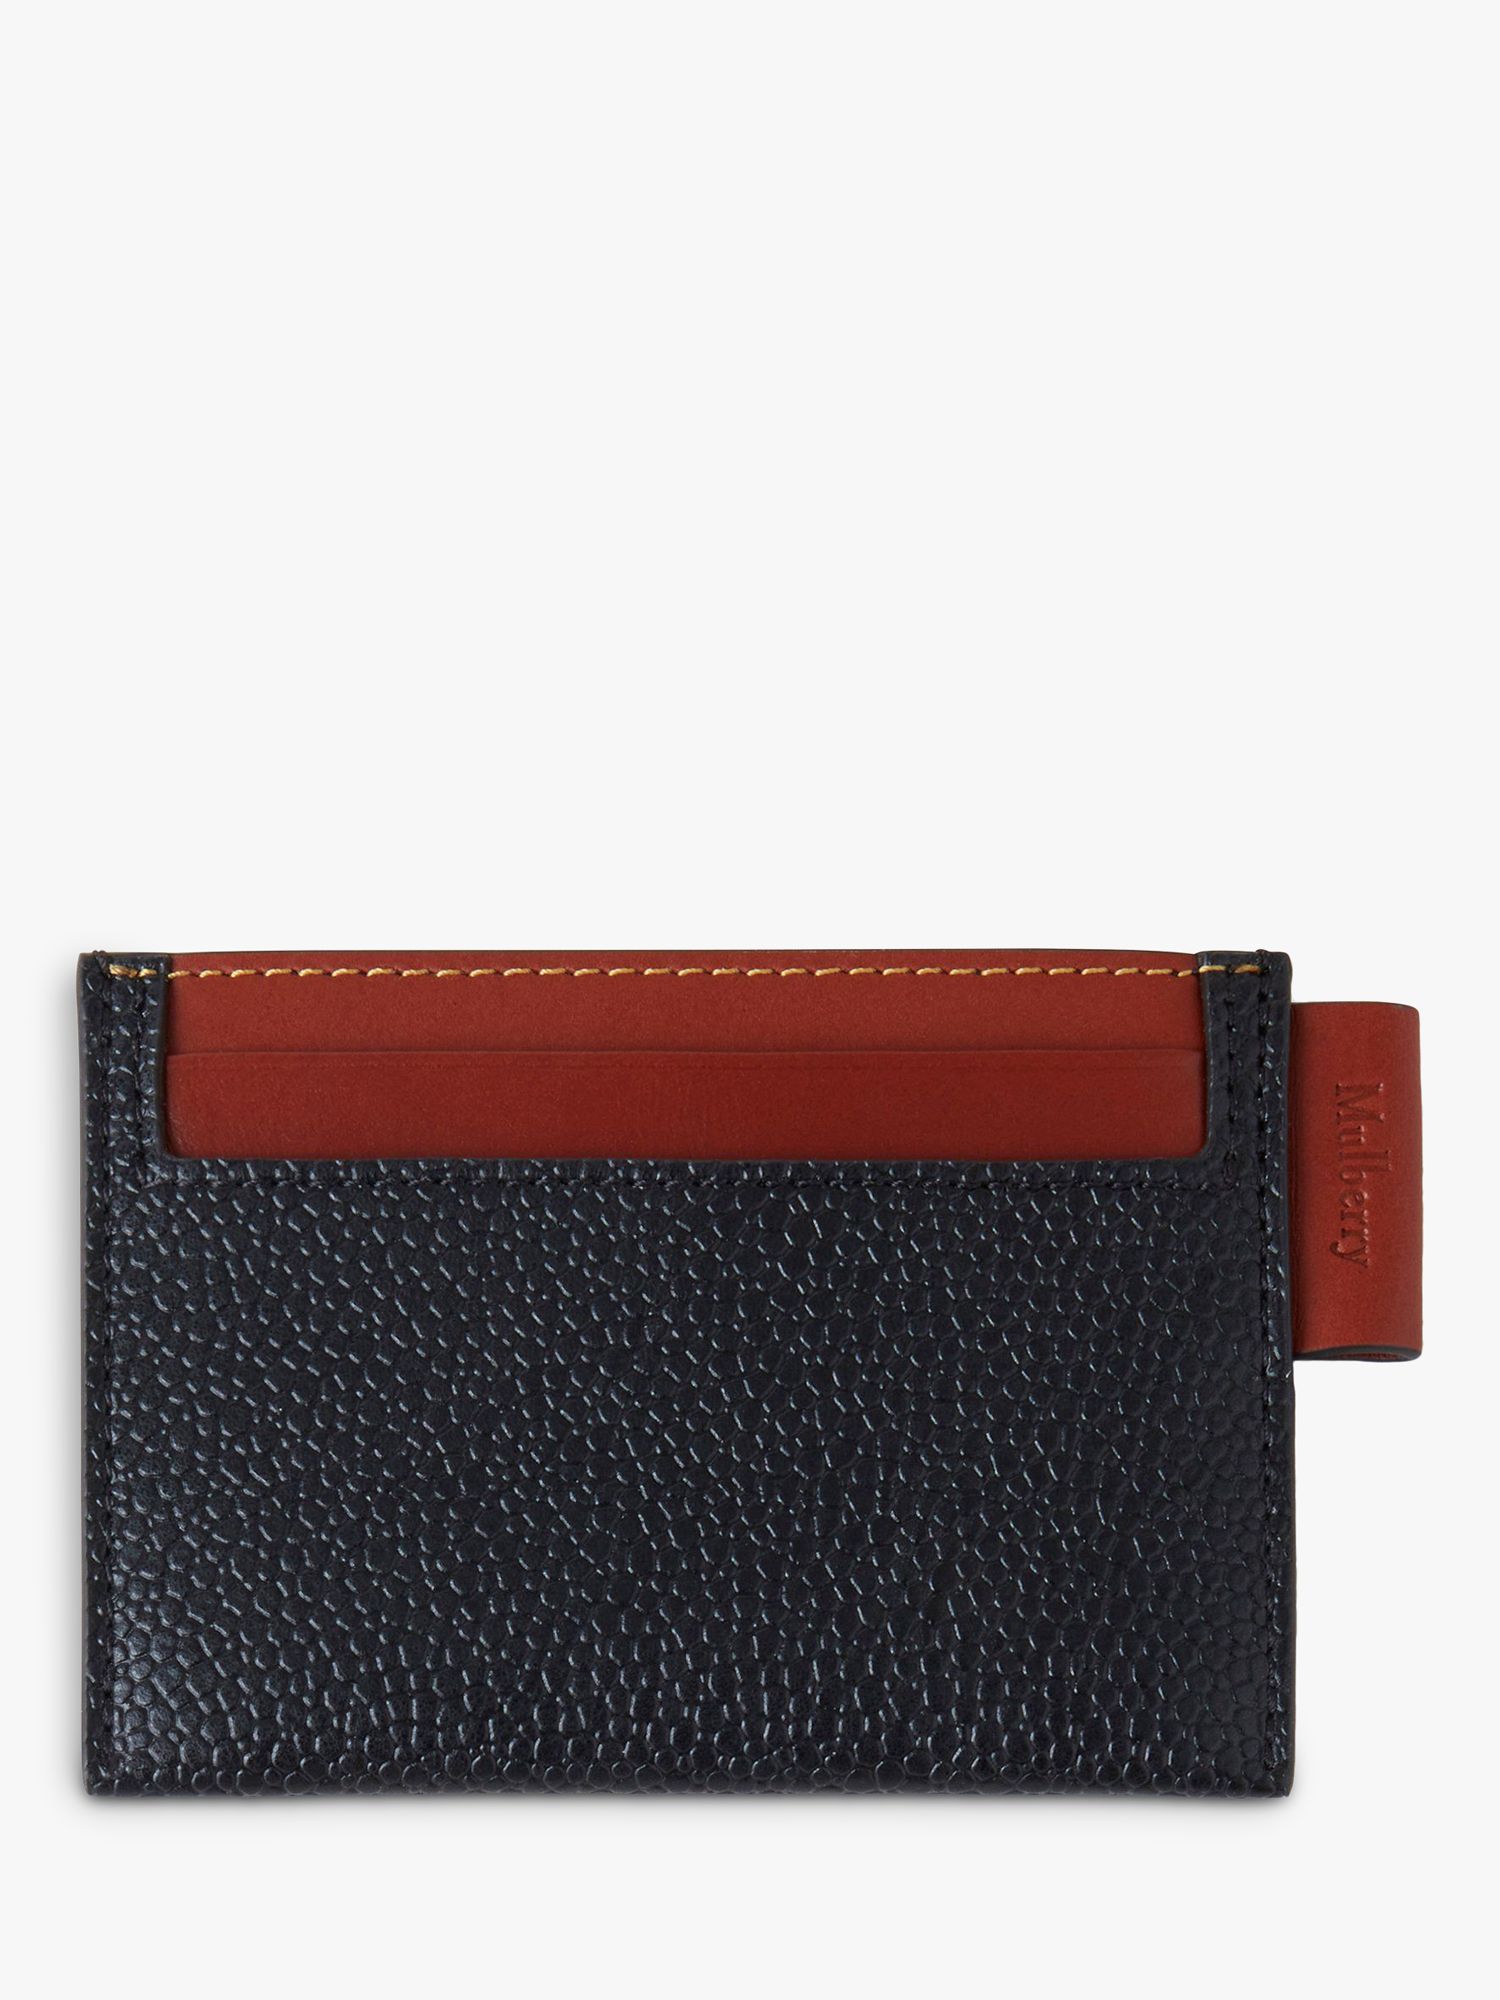 Buy Mulberry Scotch Grain Leather Credit Card Slip Online at johnlewis.com